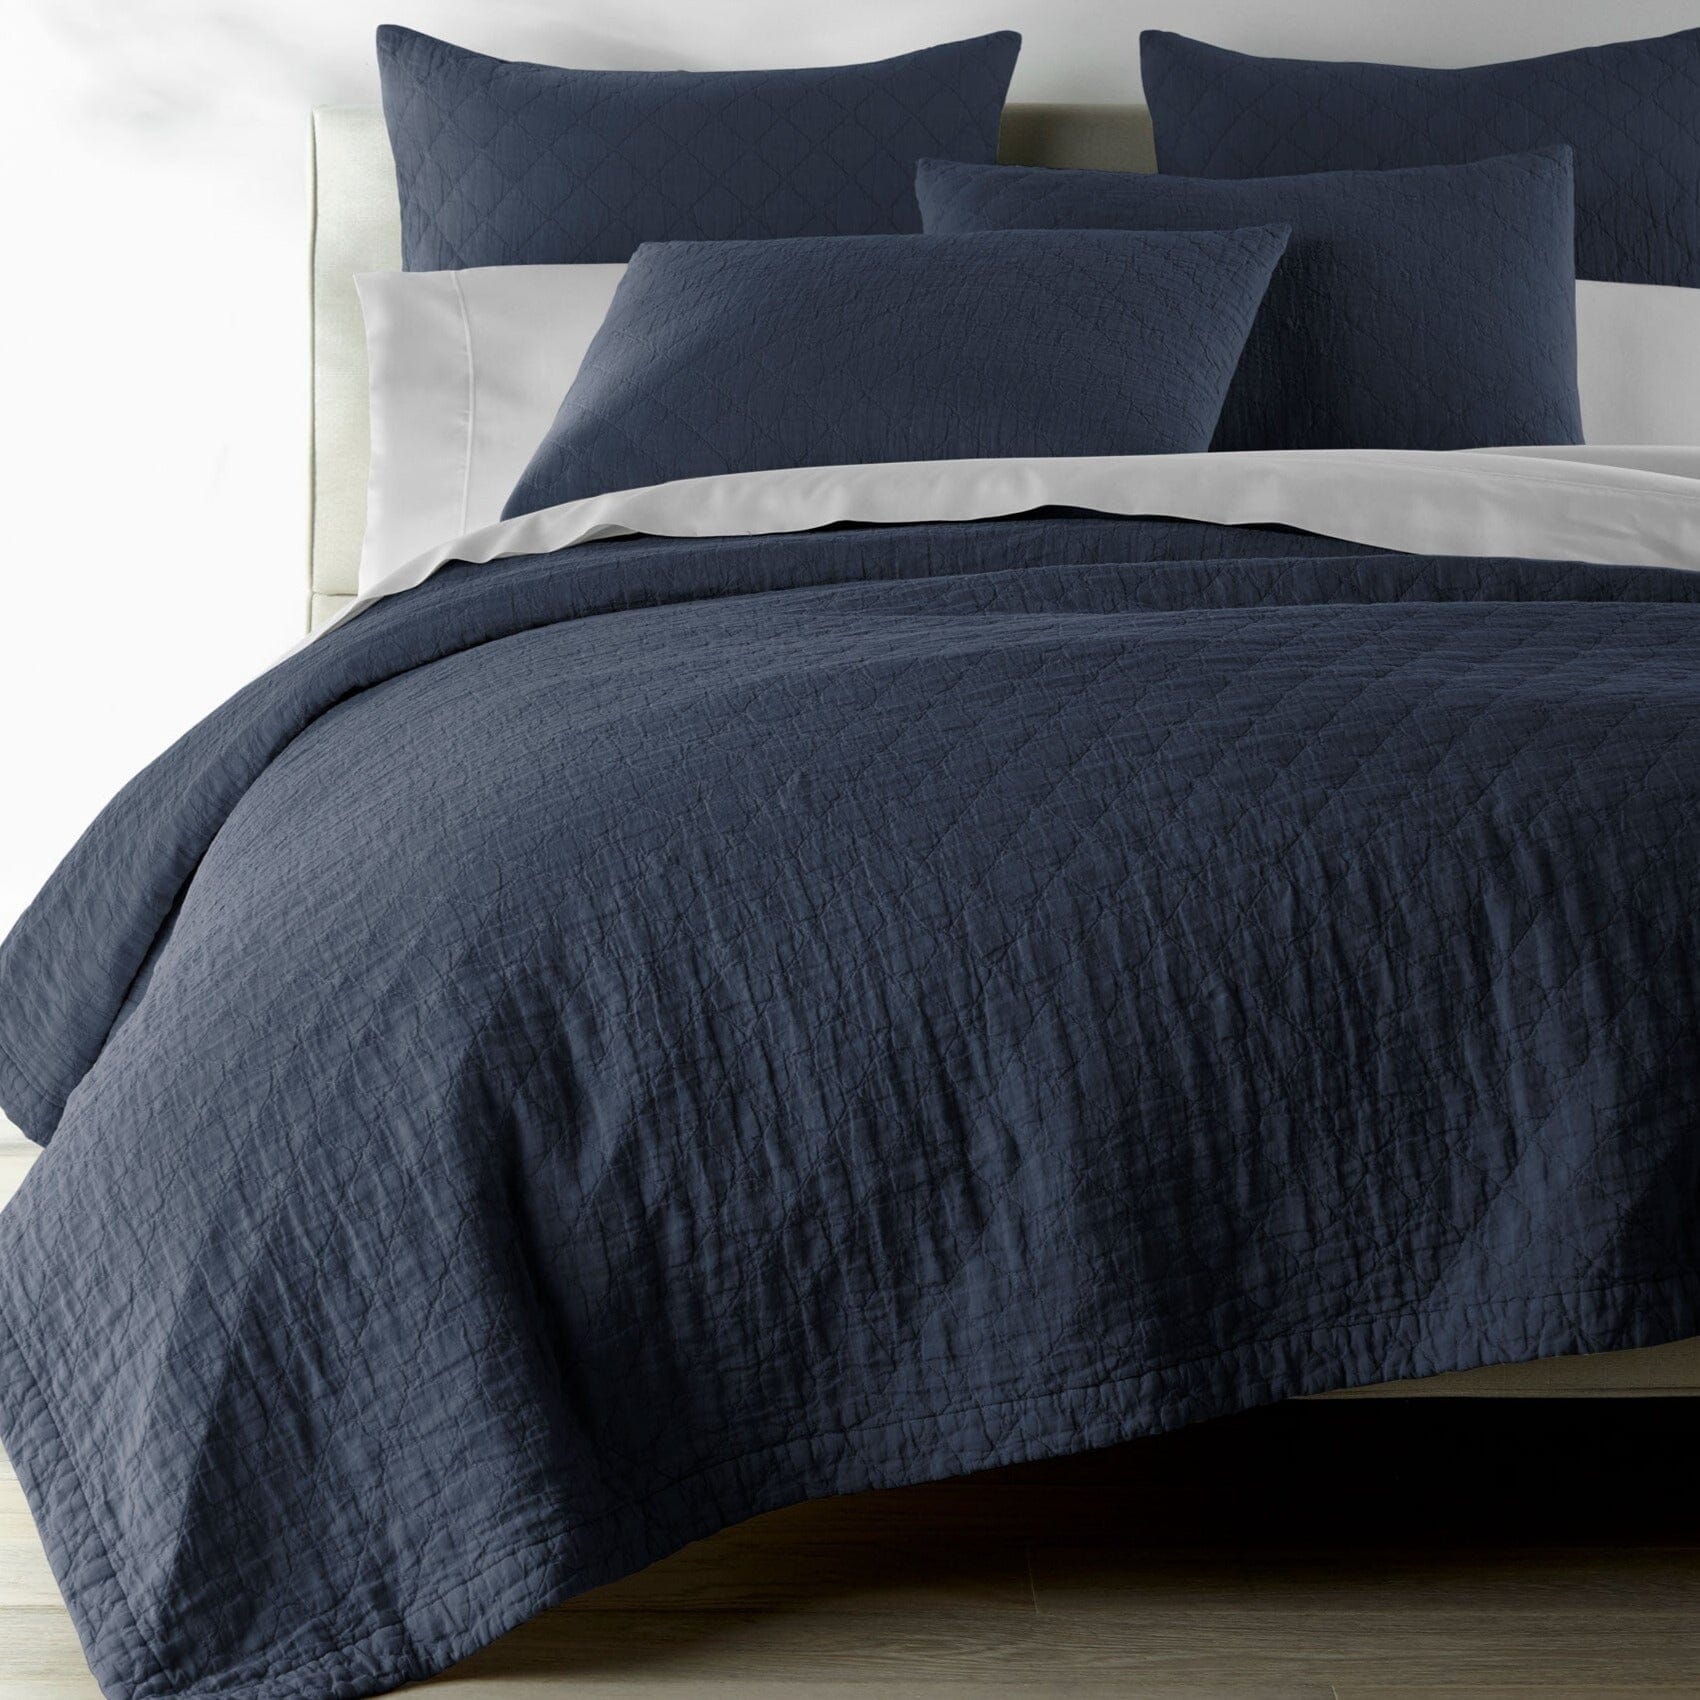 Peacock Alley Coverlet Heritage Marine  - Stone Washed Linen Quilt and Shams with White Sheets